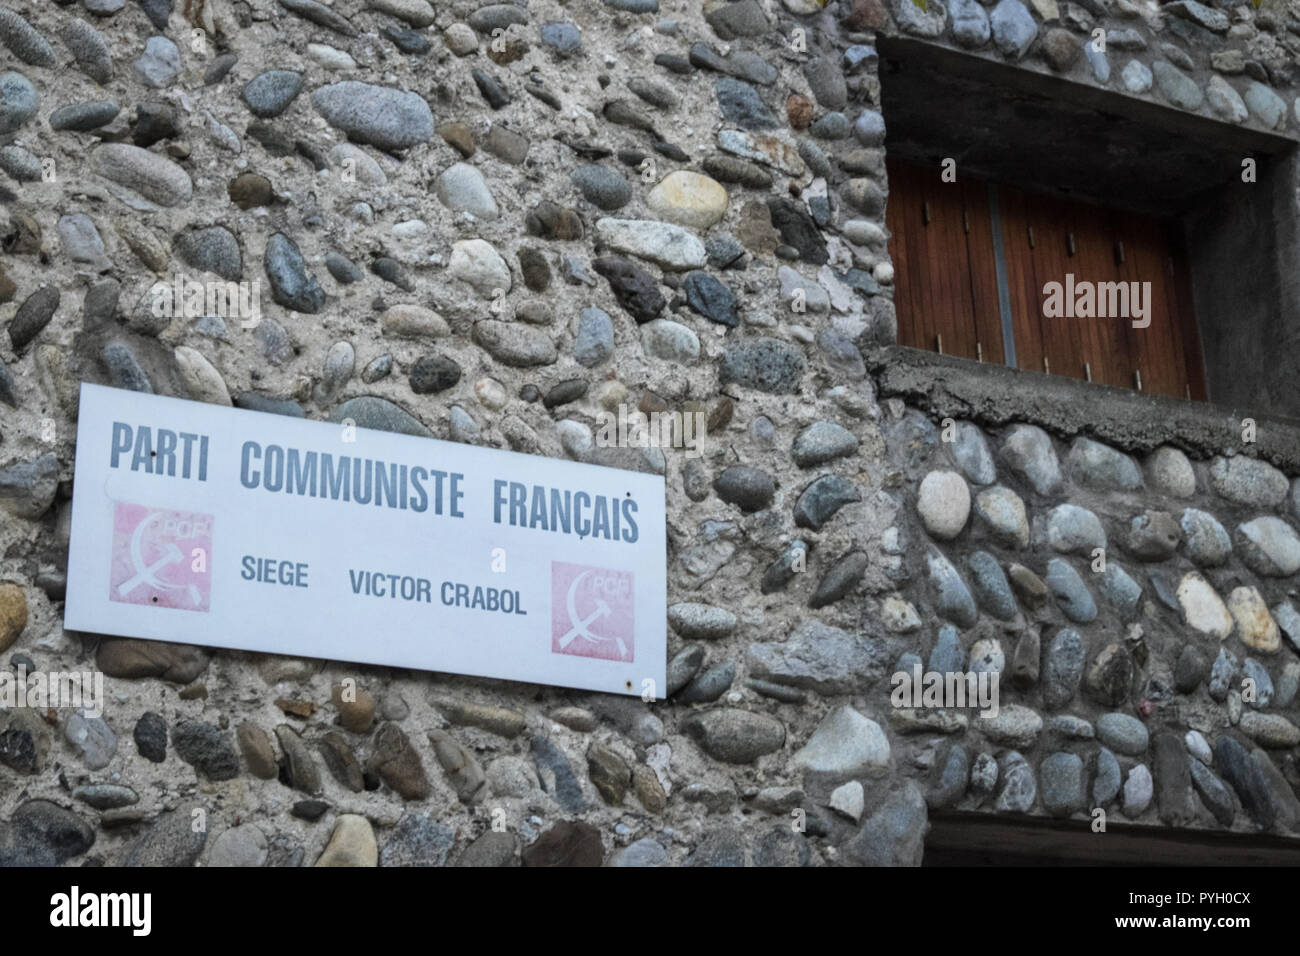 Parti,Communiste,Francais,Communist Party,France,  Headquarters,sign,signage,in,centre,of,Quillan,Aude,South,of,France,French,Europe,European, Stock Photo